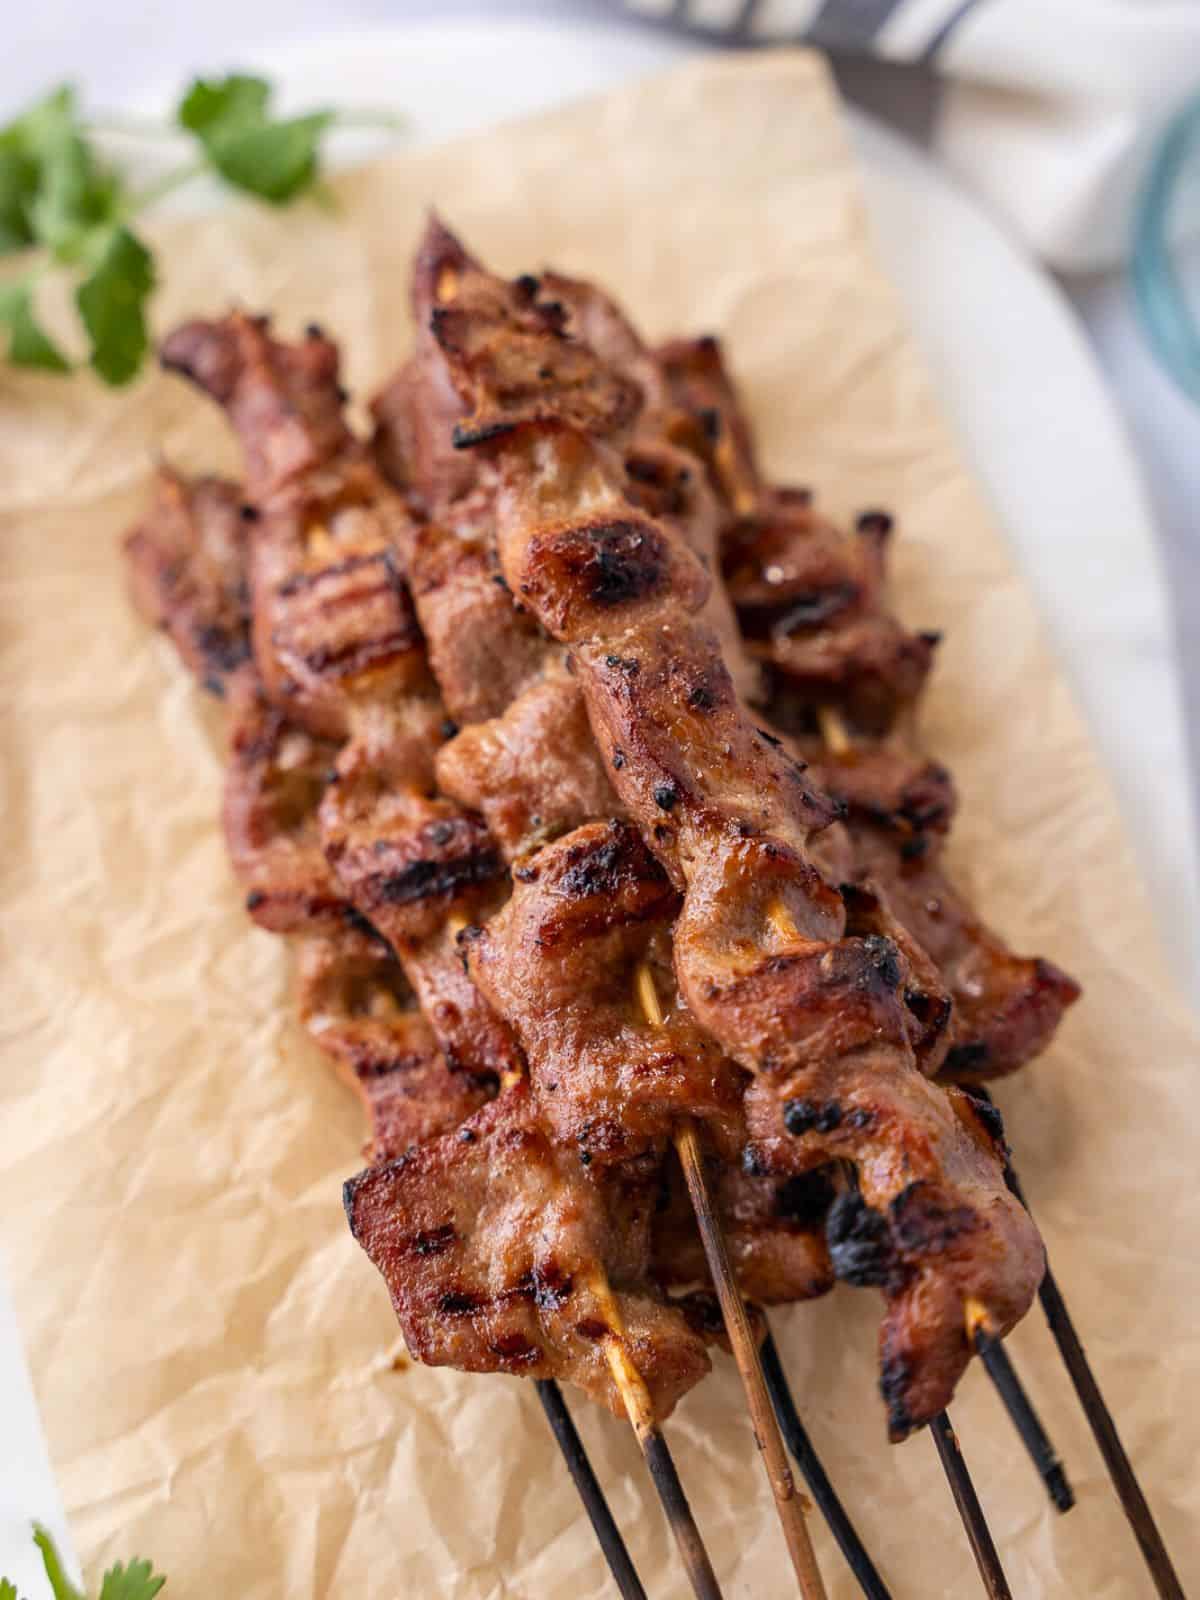 Grilled pork skewers on parchment paper with some cilantro garnish.